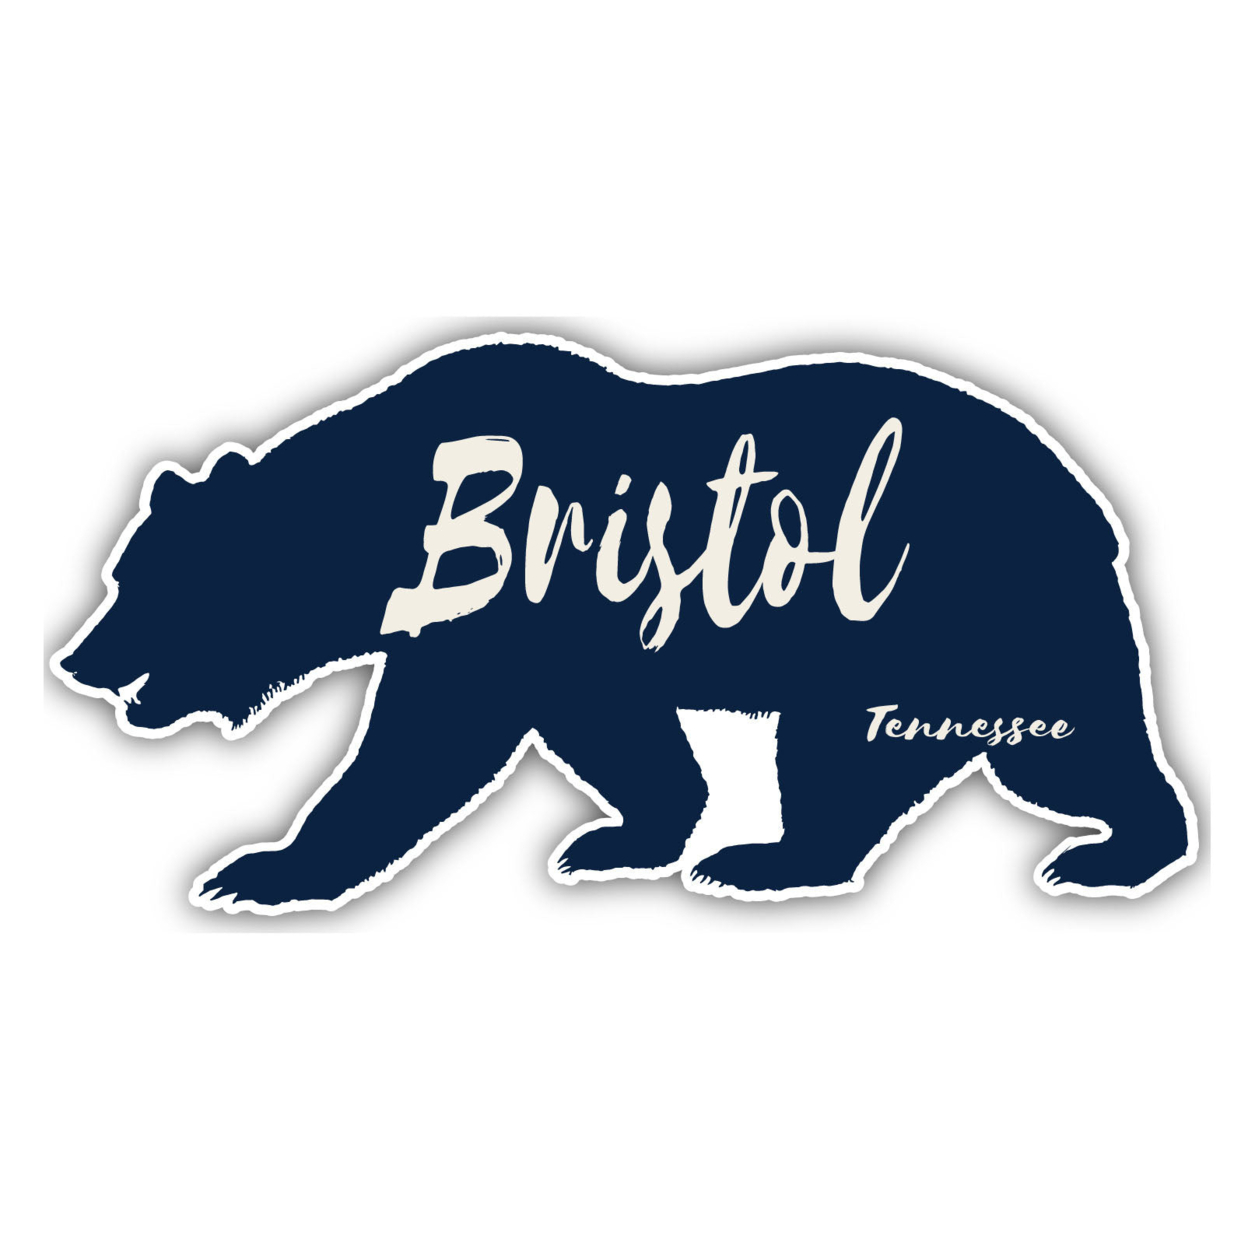 Bristol Tennessee Souvenir Decorative Stickers (Choose Theme And Size) - Single Unit, 6-Inch, Adventures Awaits